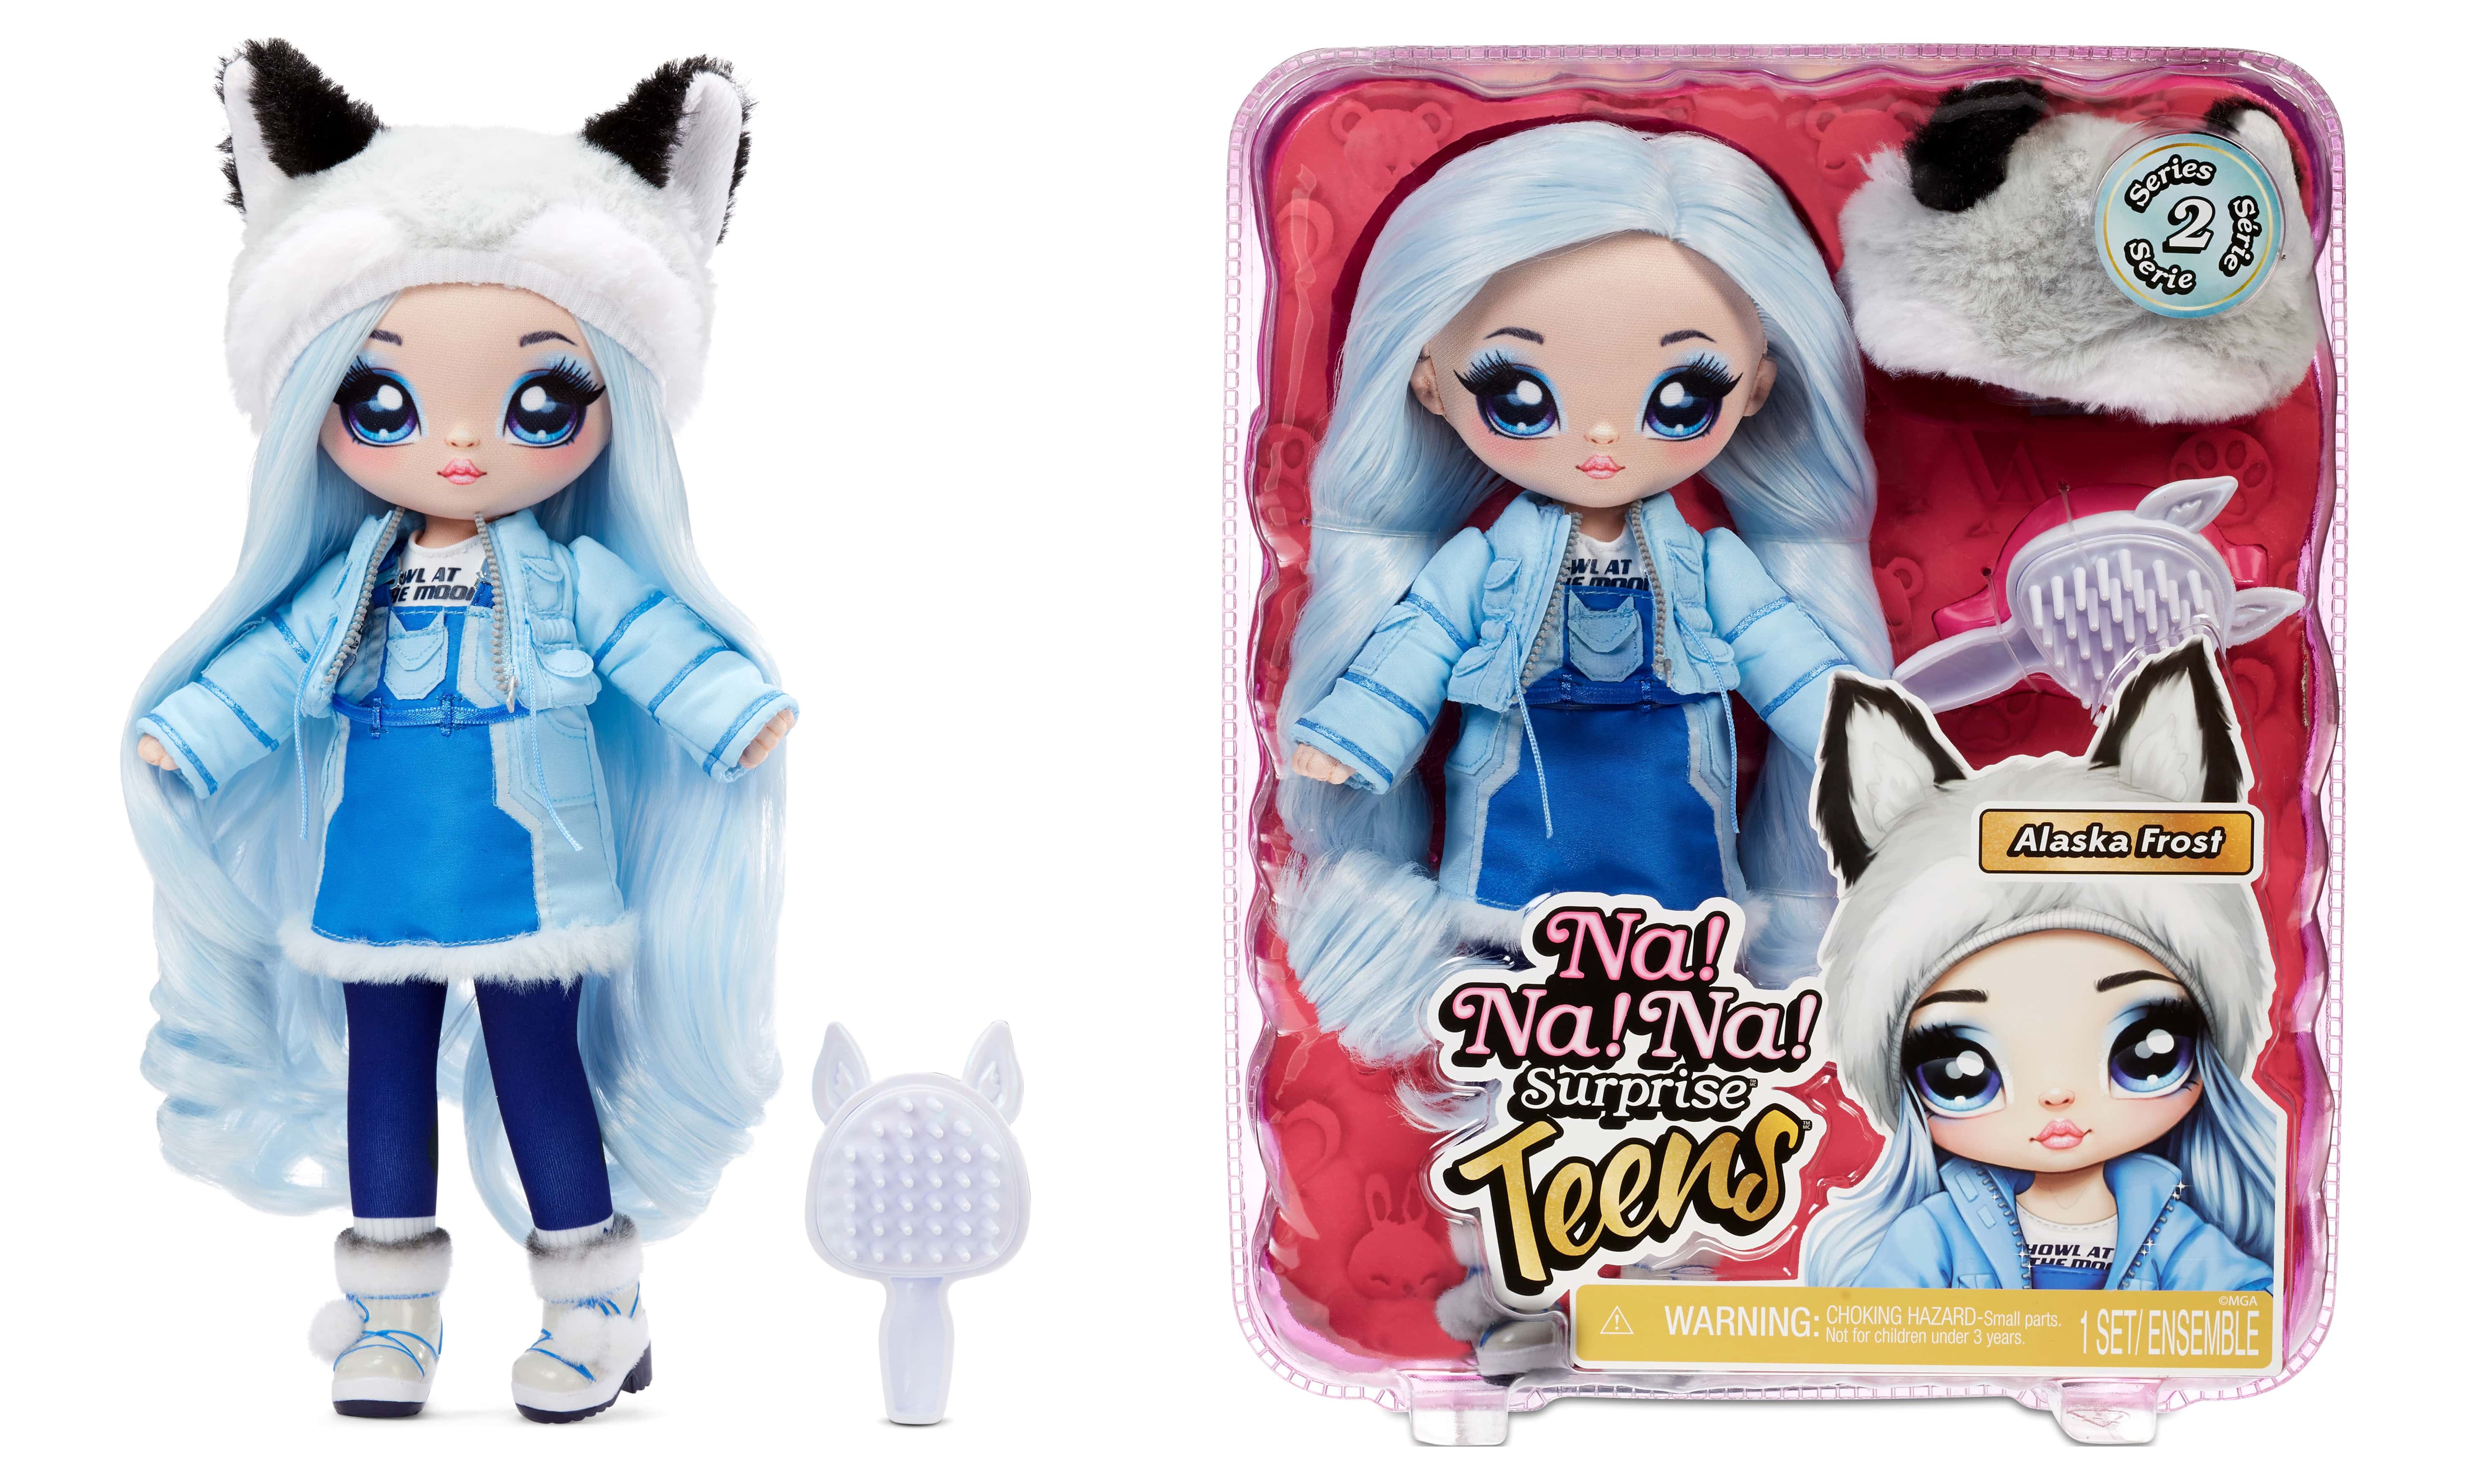 Na! Na! Na! Surprise Teens Fashion Alaska Frost Doll Playset, 3 Pieces - image 1 of 9